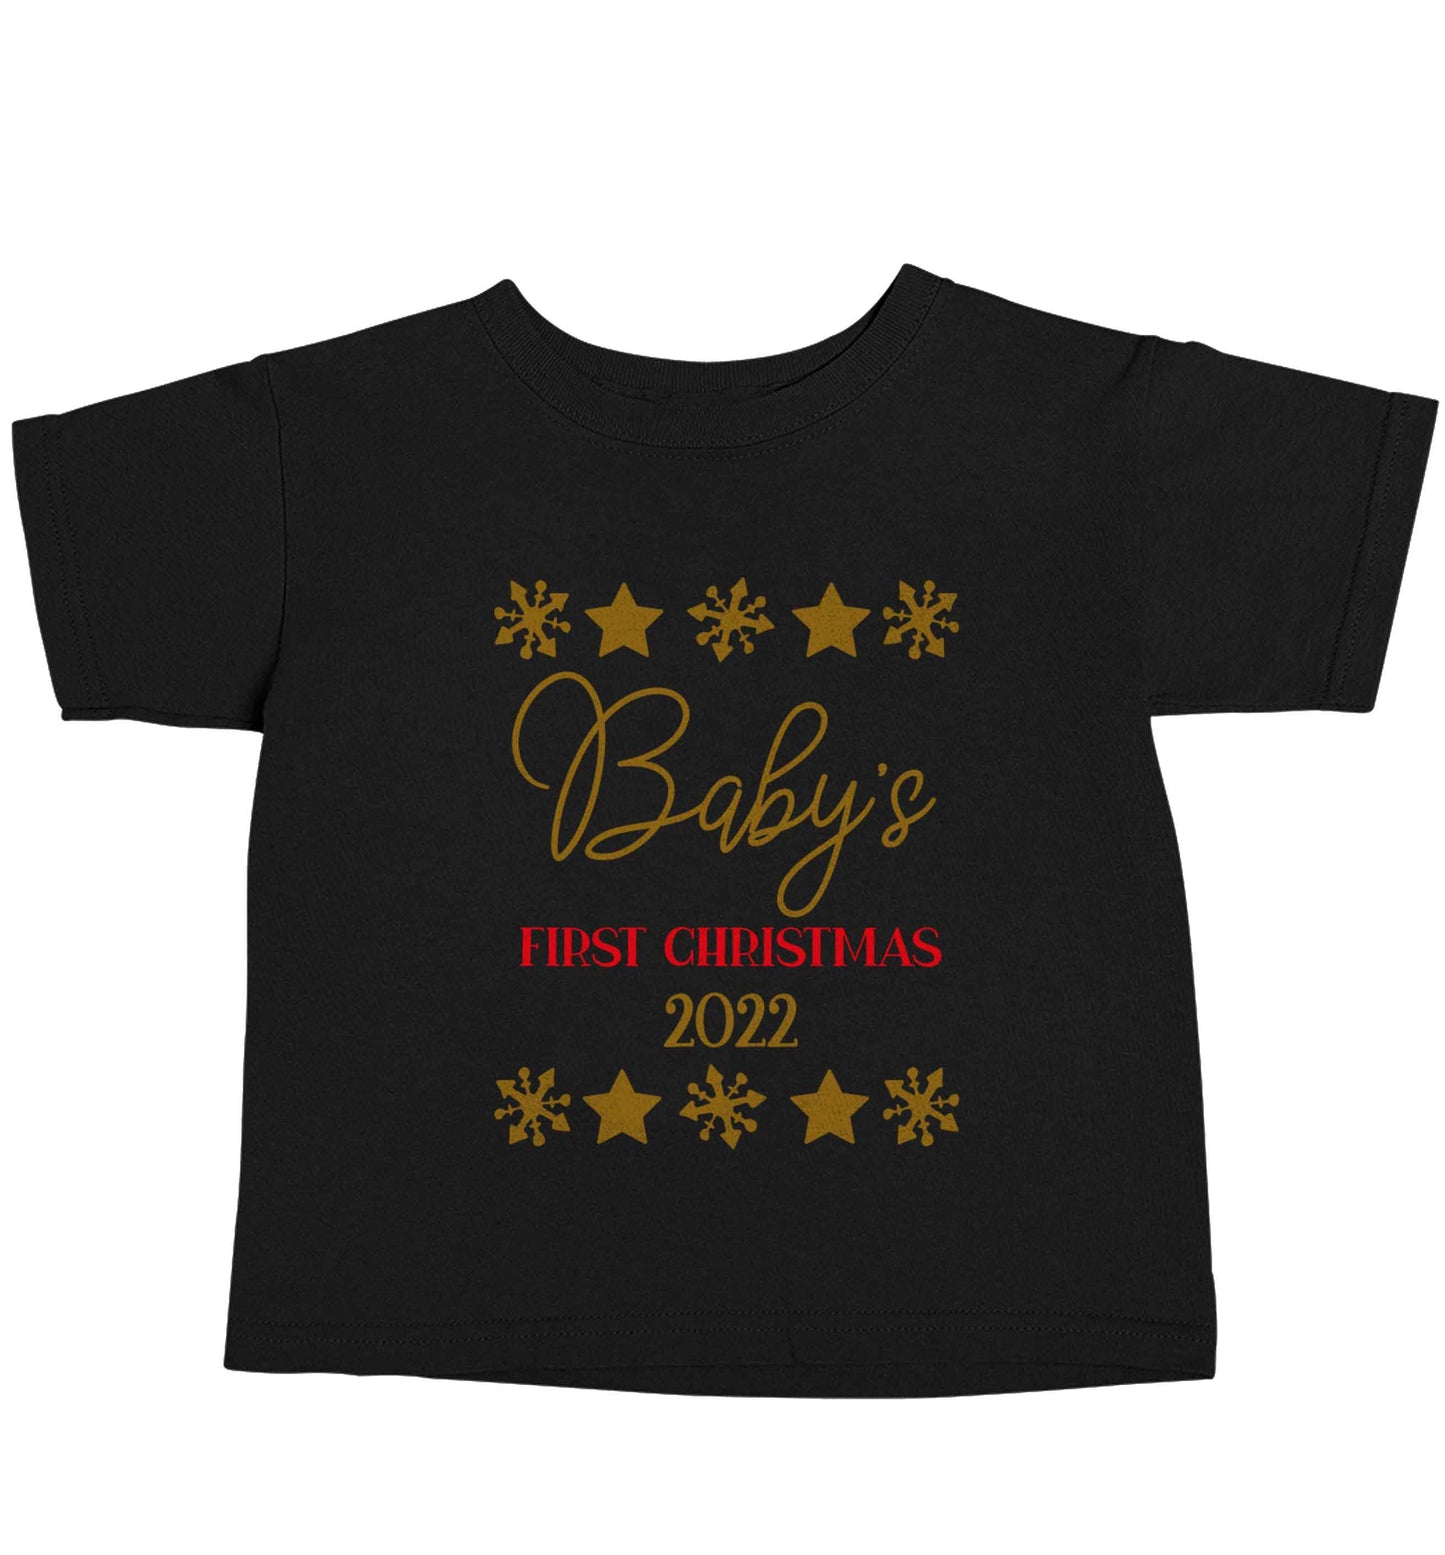 Baby's first Christmas Black baby toddler Tshirt 2 years